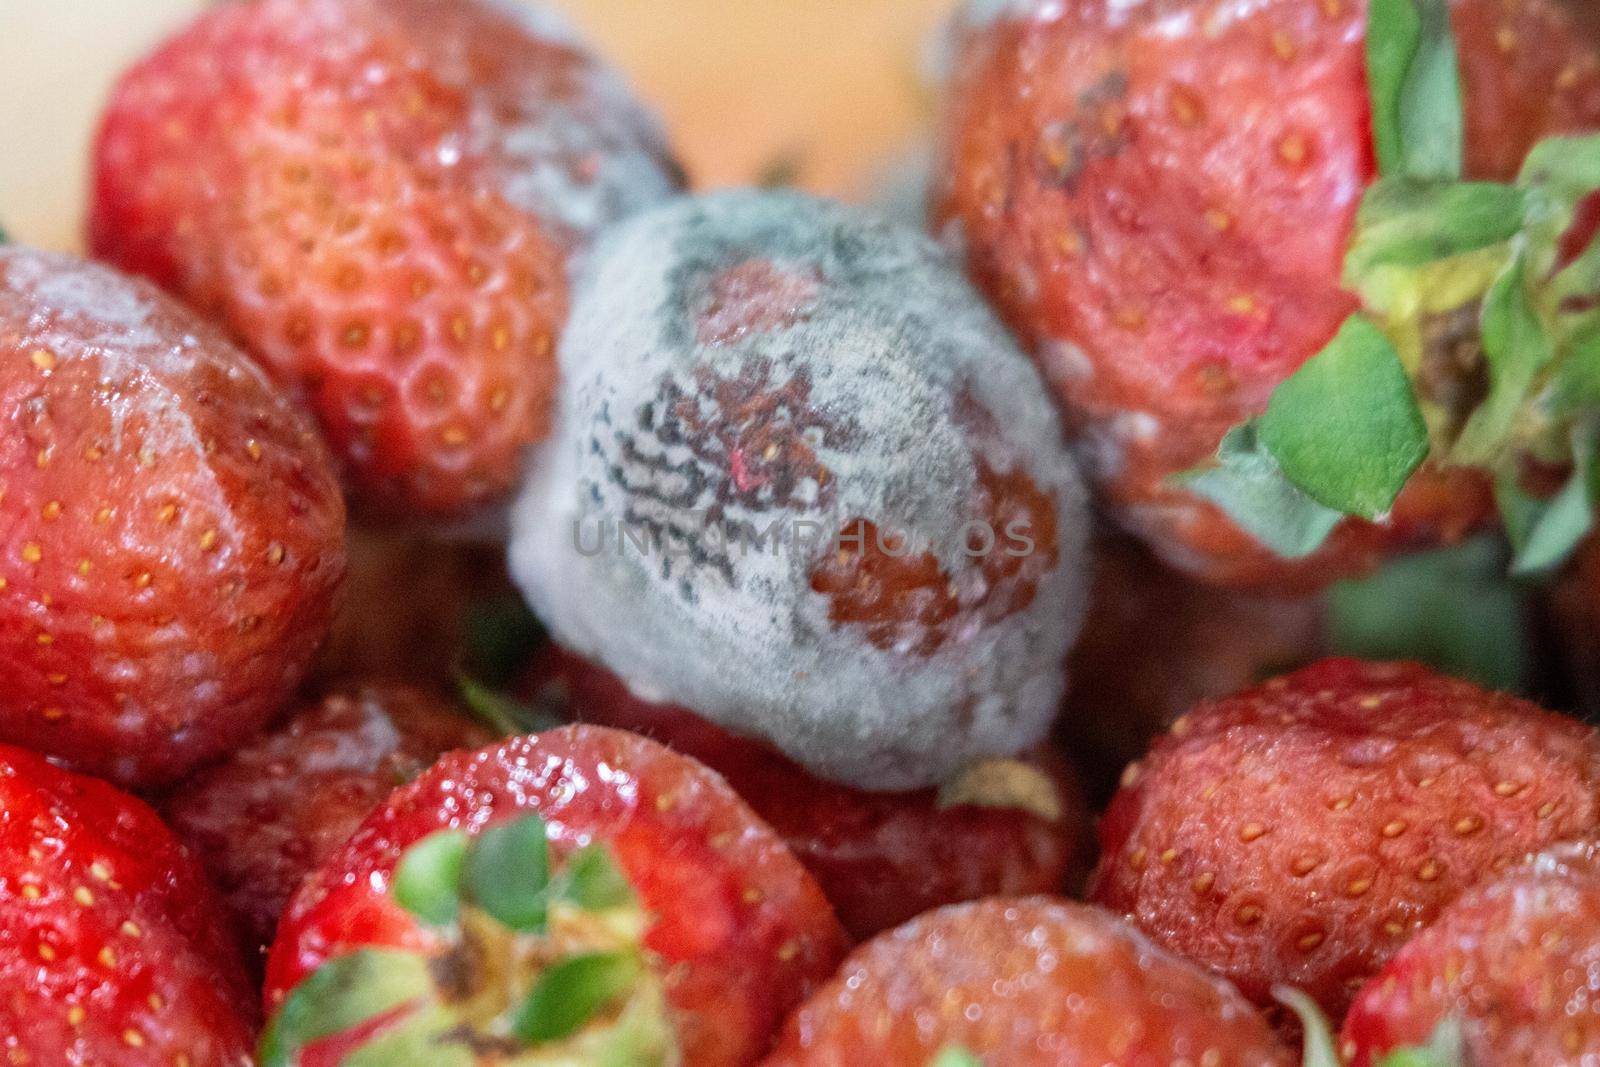 close up photos of moldy strawberries. Food waste is a big issue by mynewturtle1